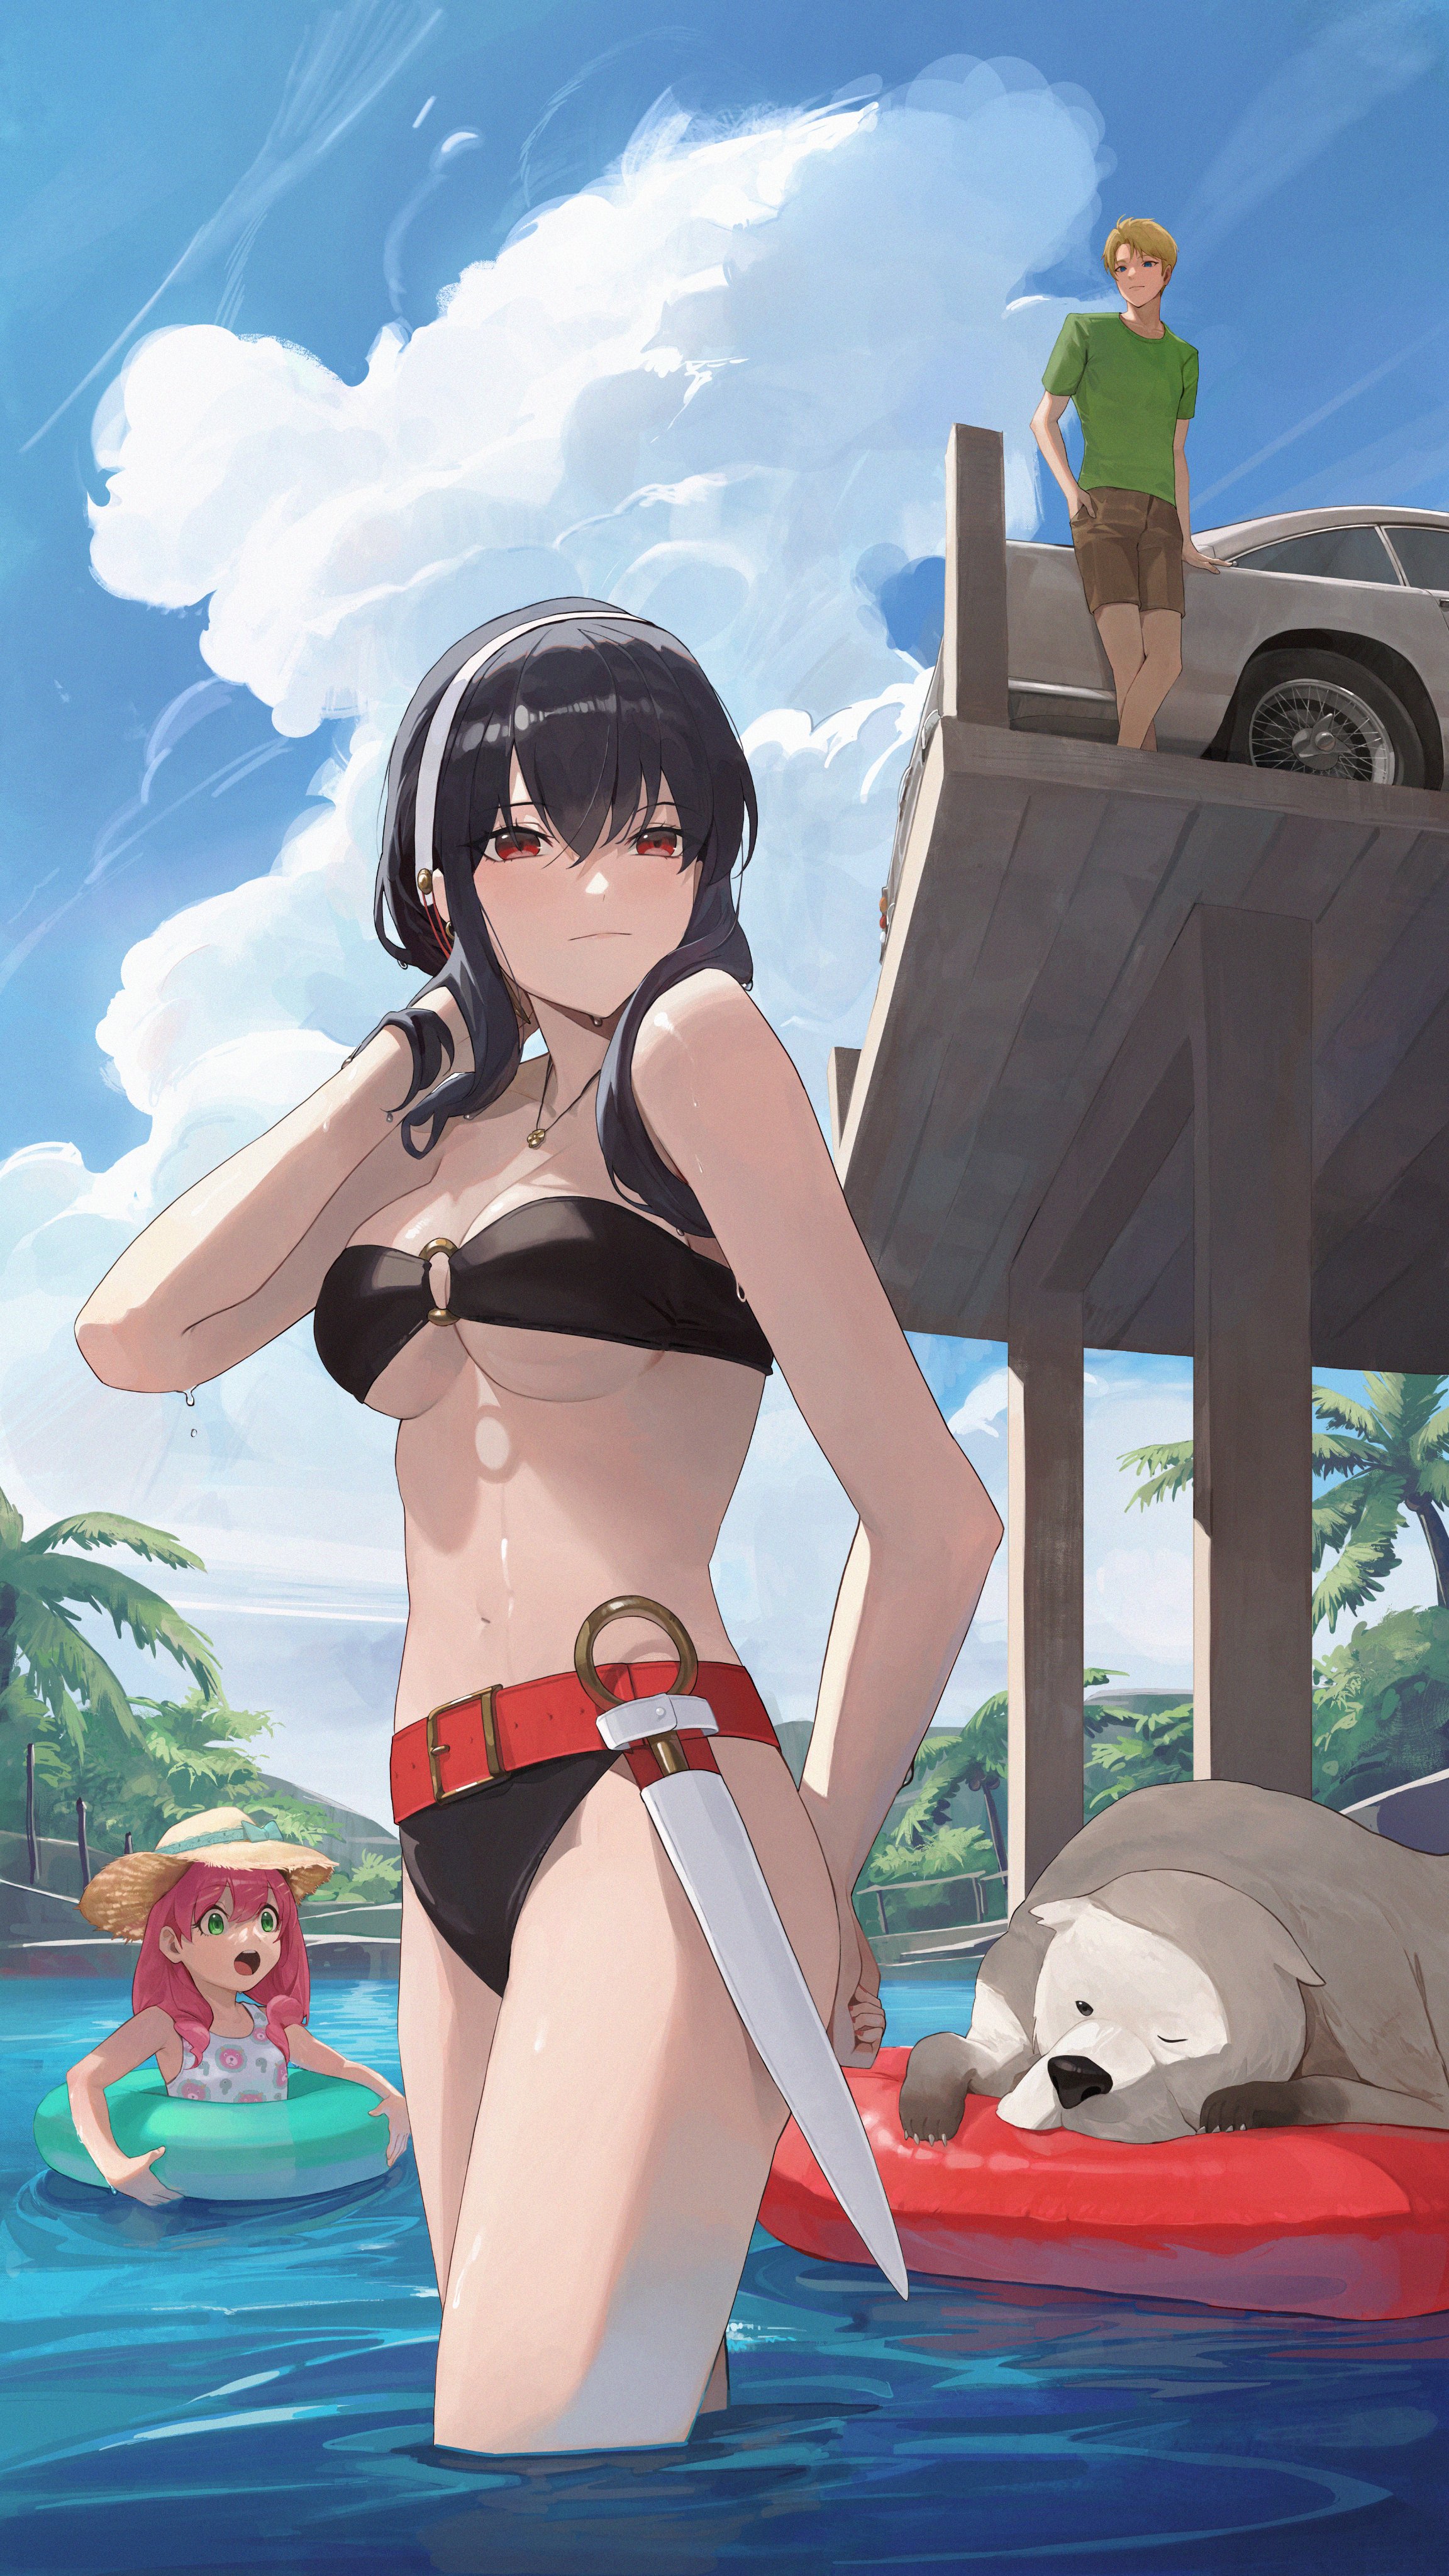 Anime 2304x4096 anime anime girls Spy x Family Yor Forger Anya Forger Loid Forger anime boys water floater swimwear standing in water car Aston Martin Aston Martin DB5 palm trees low-angle looking below red eyes Bond Forger clouds